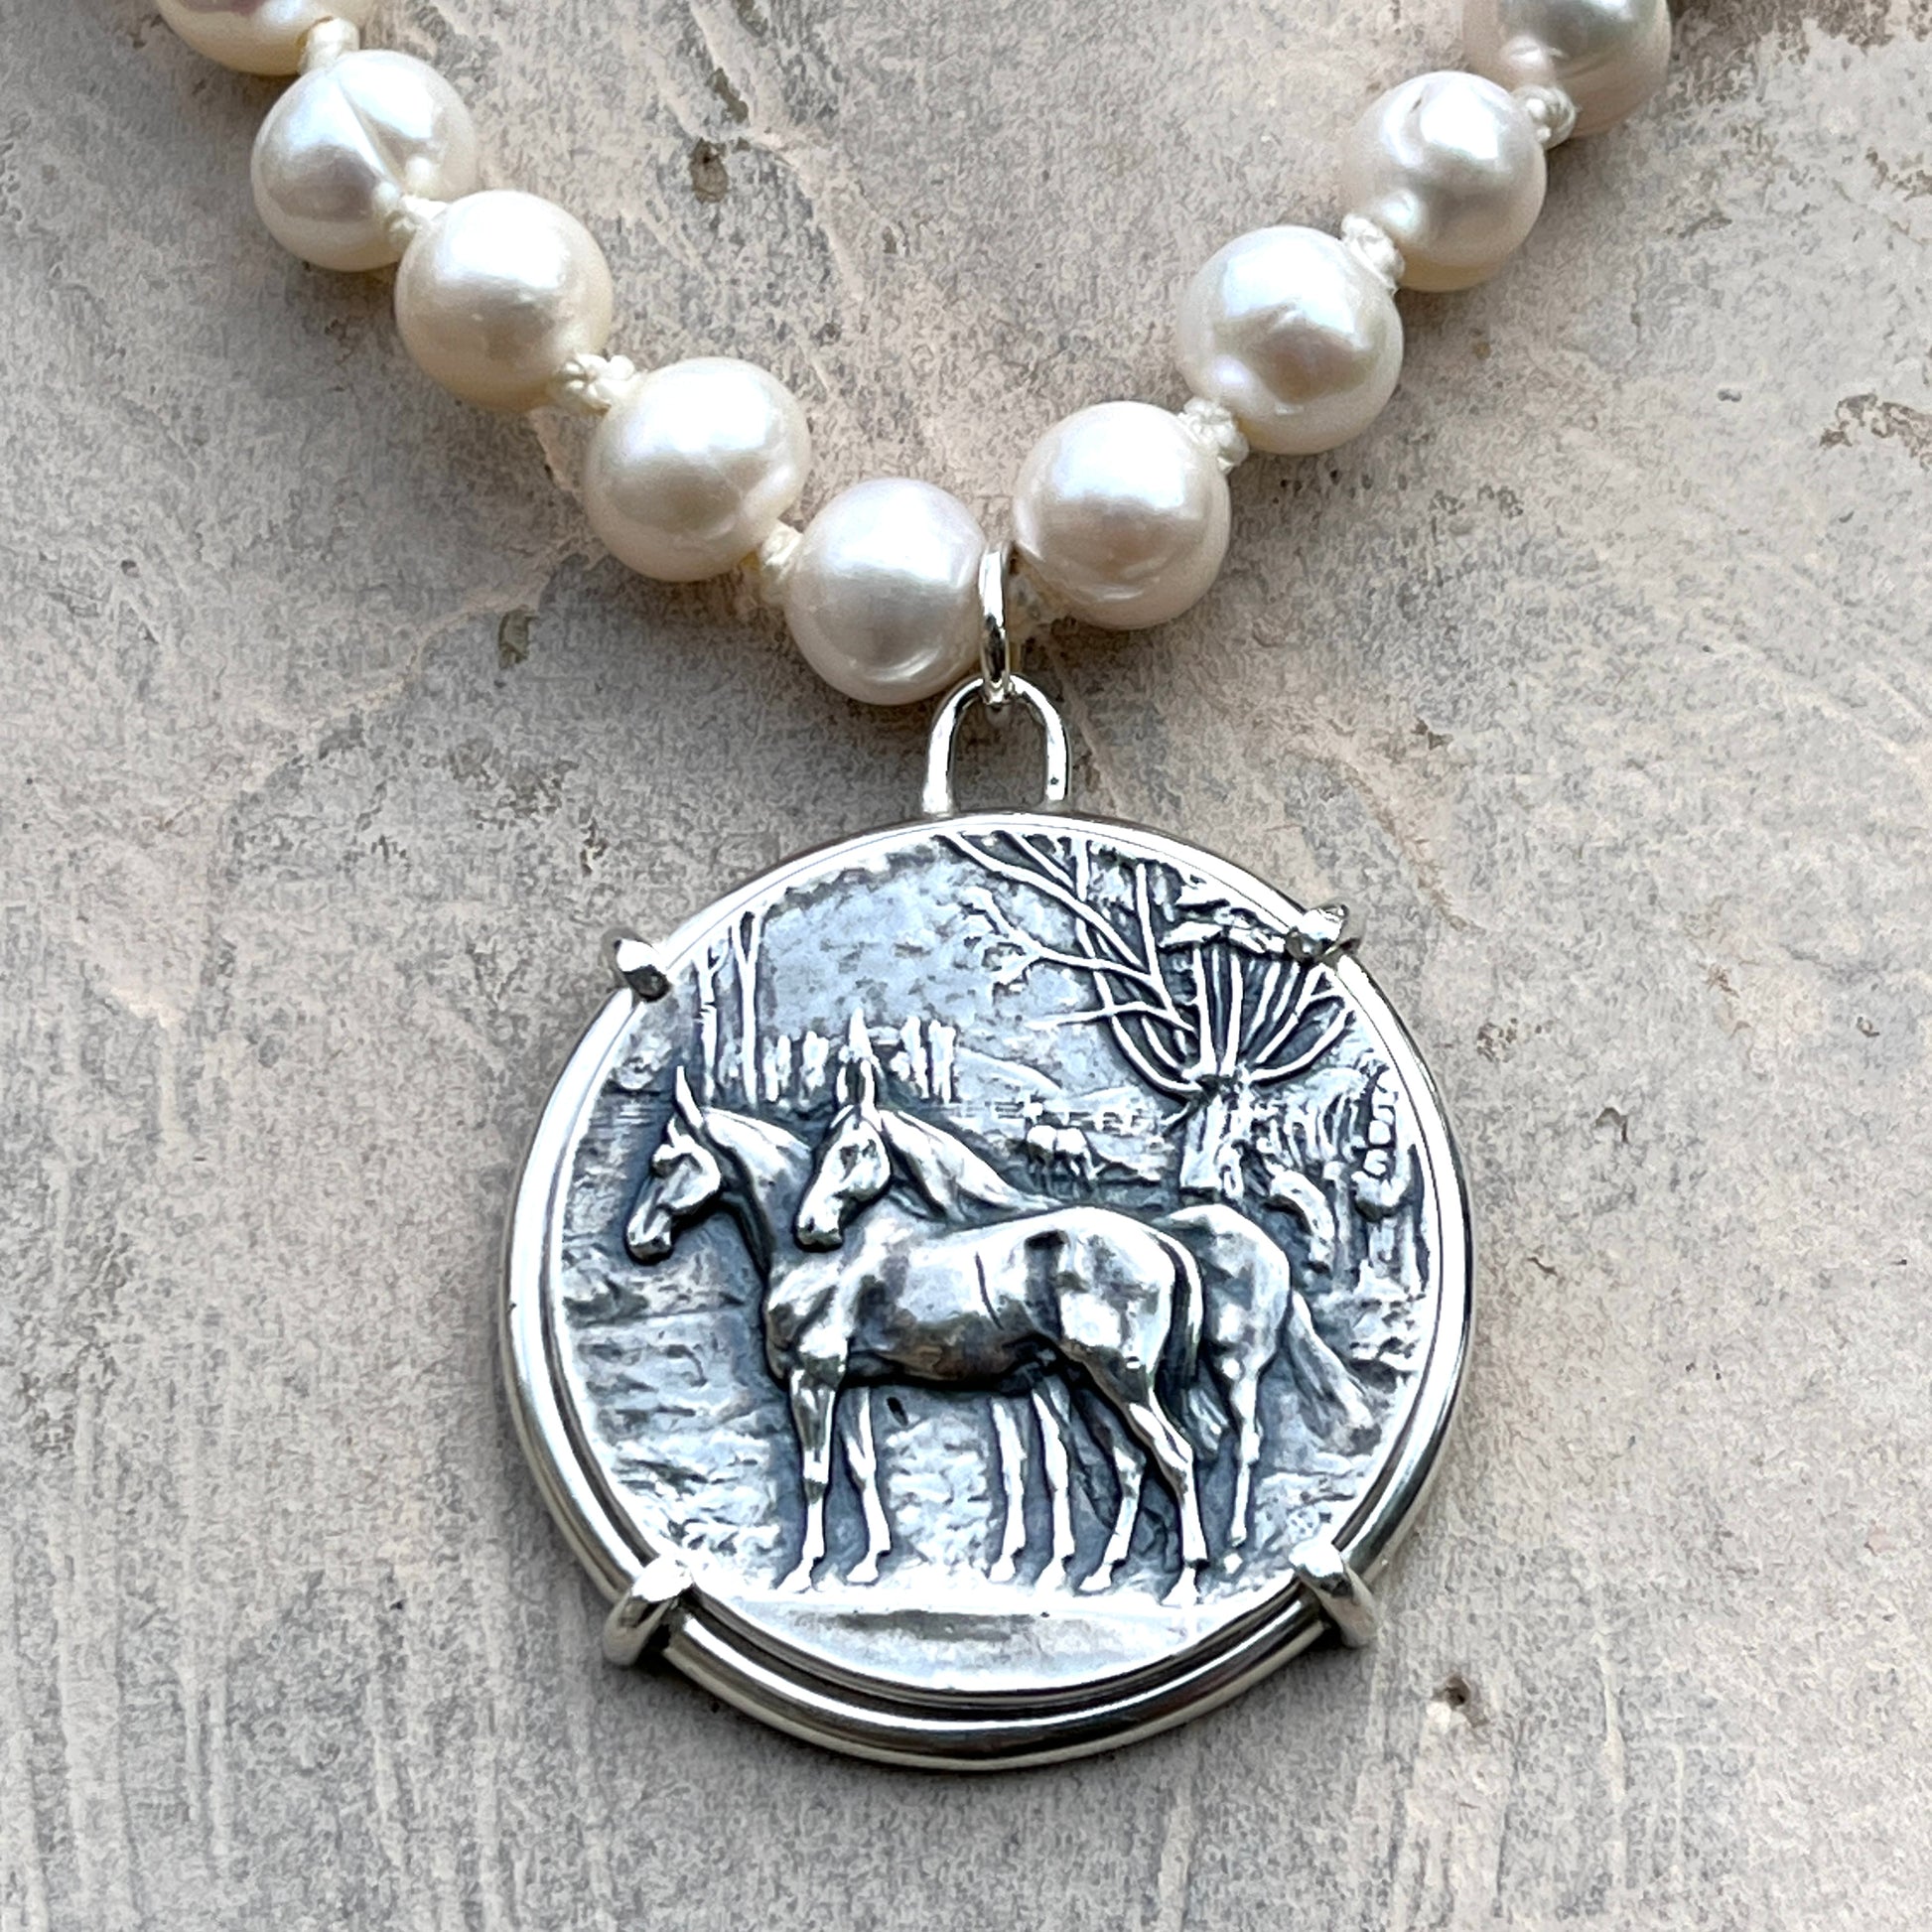 Pasture Pals Medal on Pearl Necklace